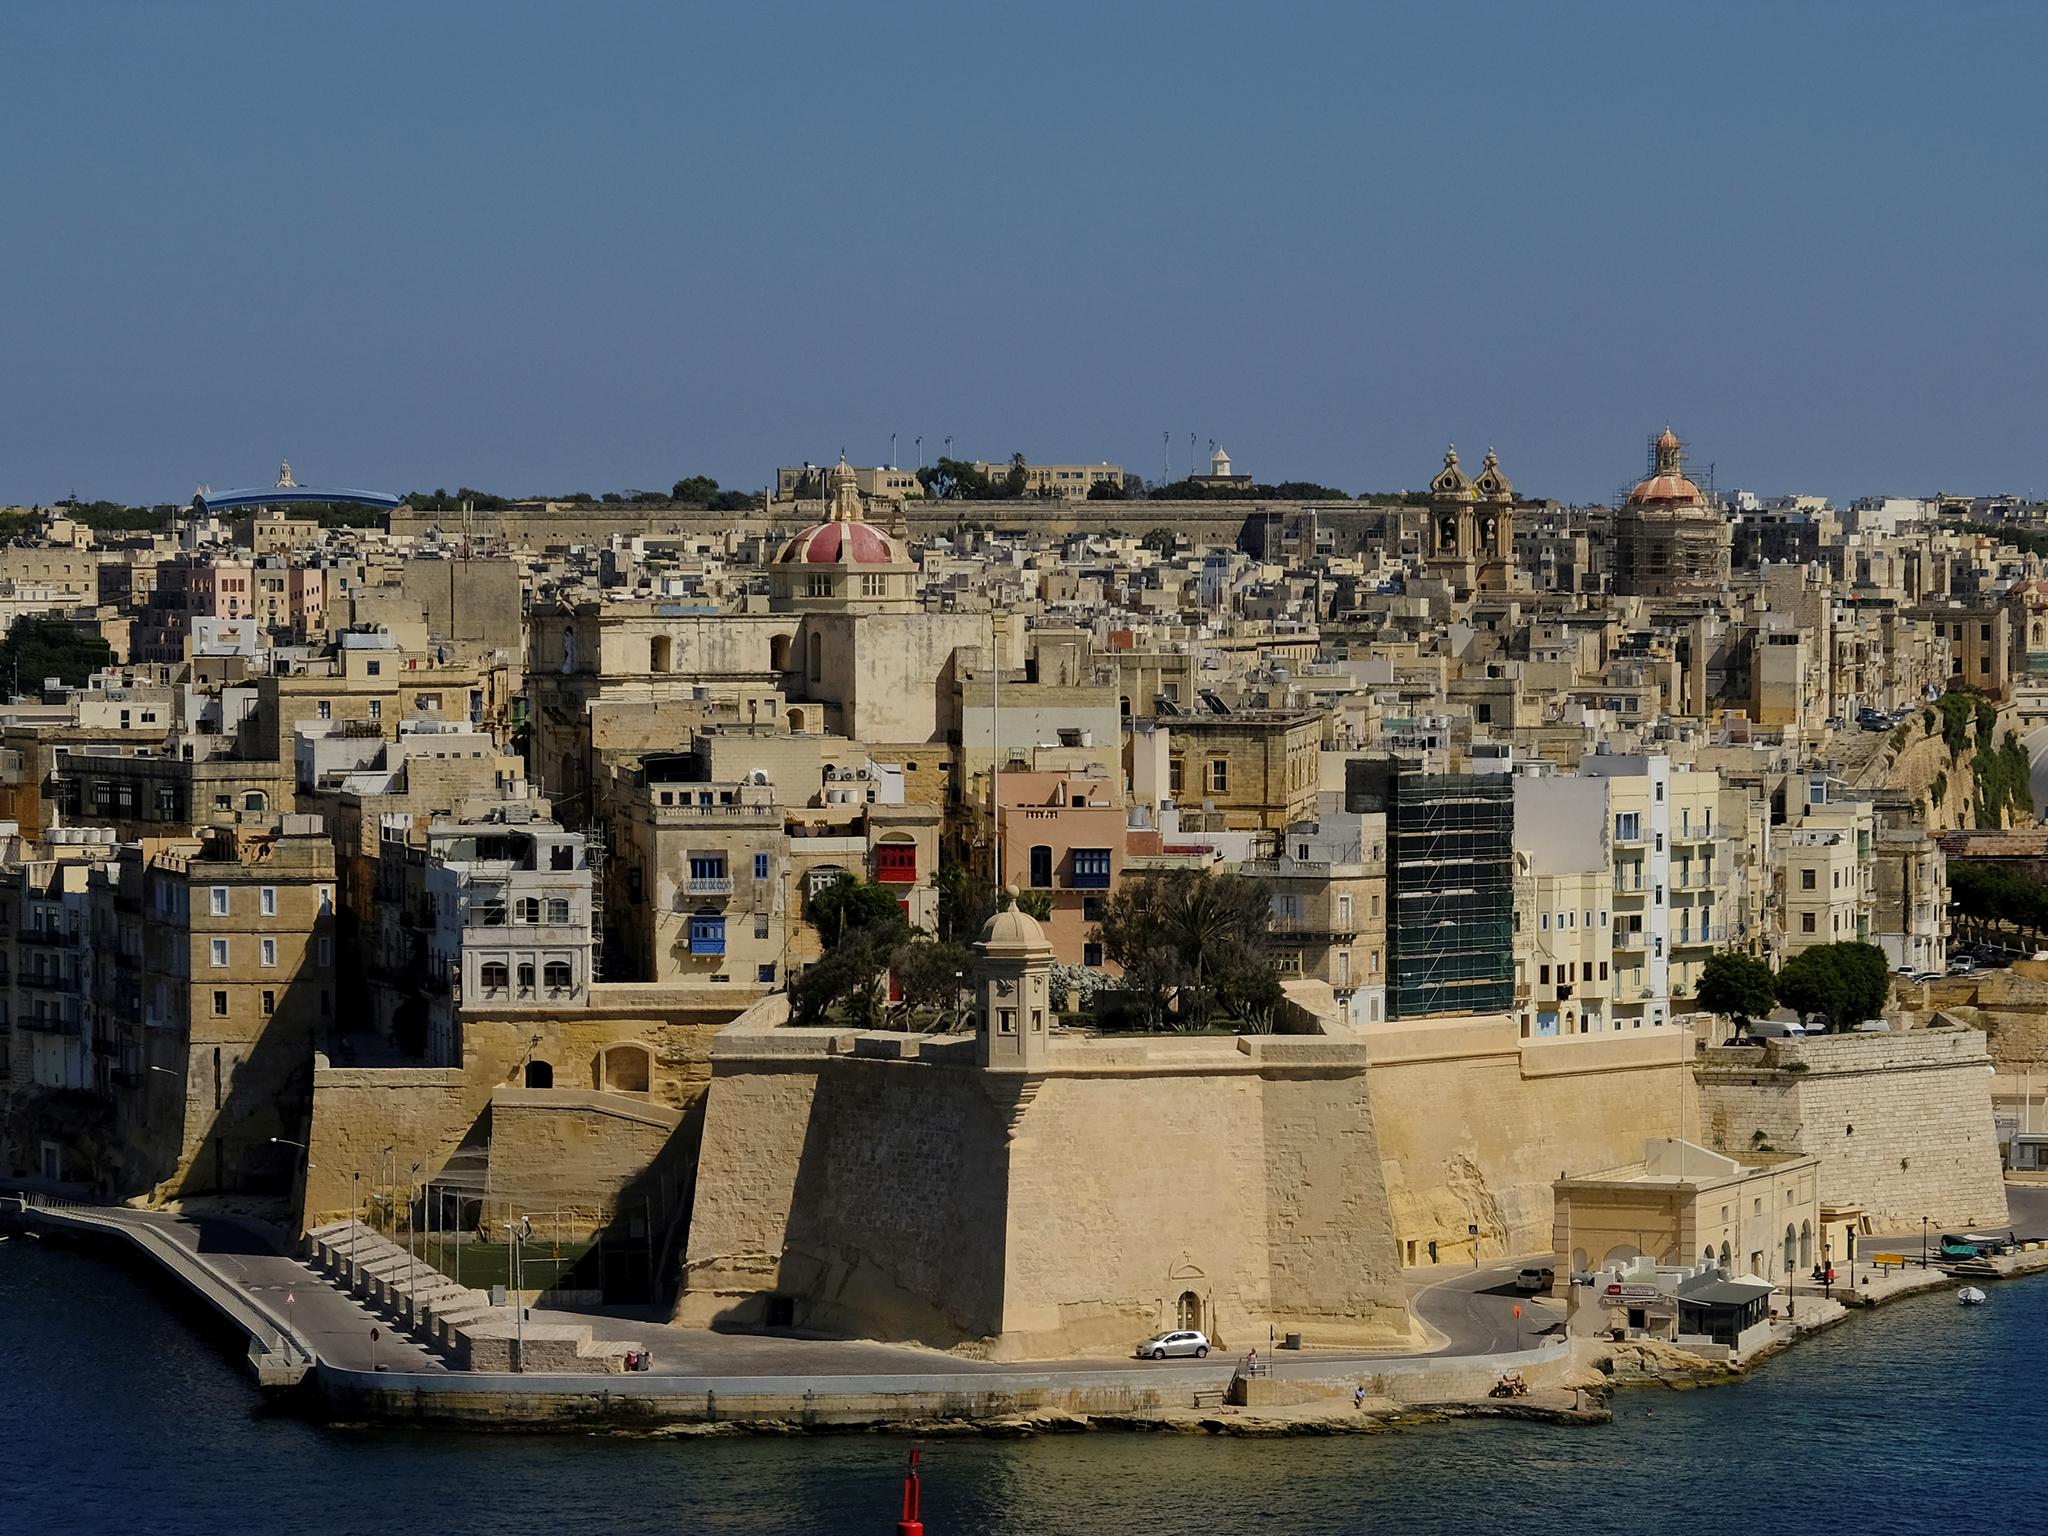 If the changes pass, Malta will become the 13th EU country to adopt gay marriage